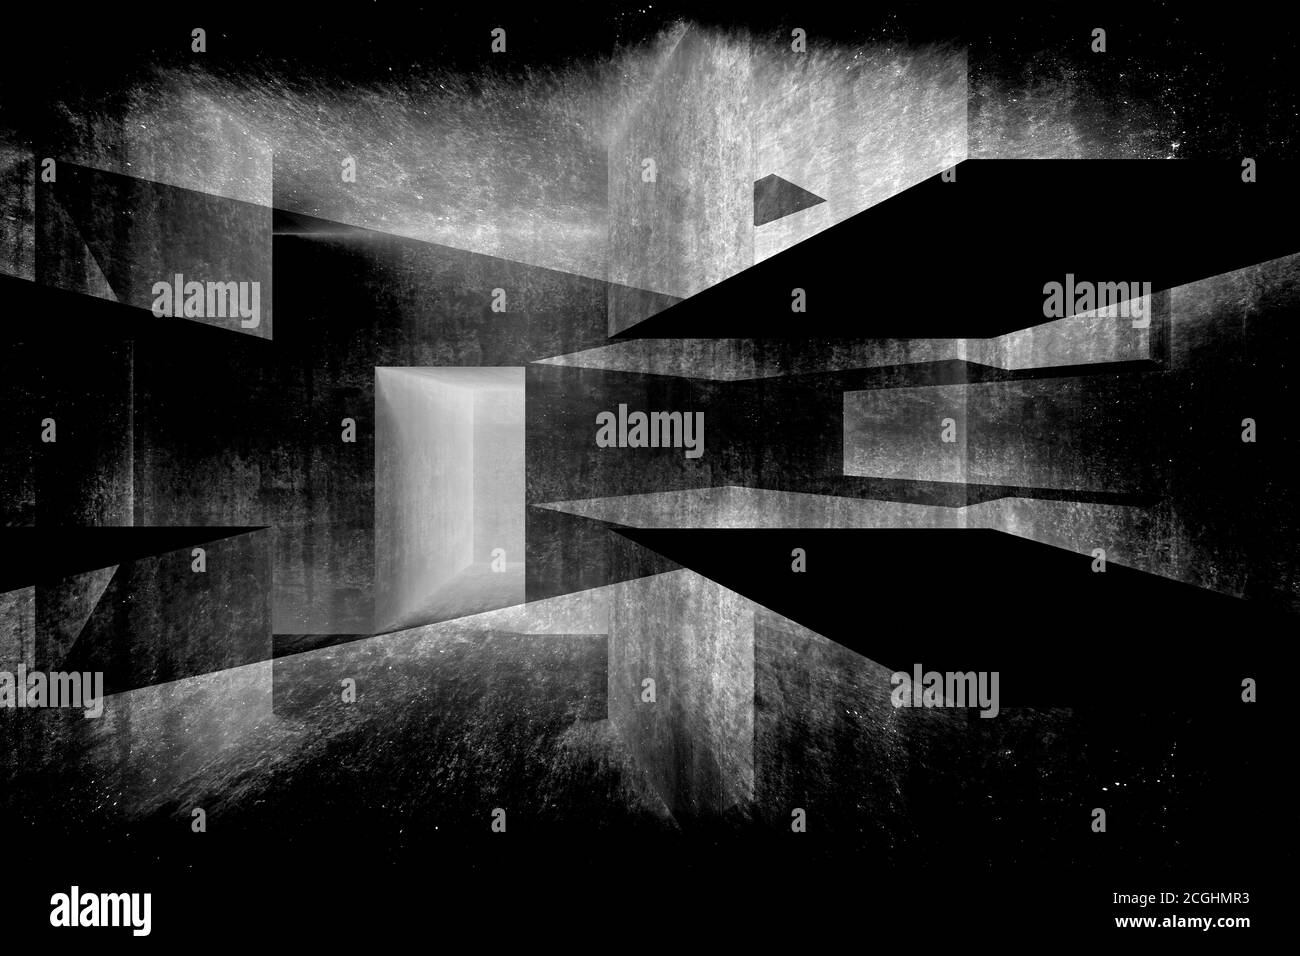 Abstract dark geometric background, intersected concrete walls, digital illustration with double exposure effect, 3d render Stock Photo